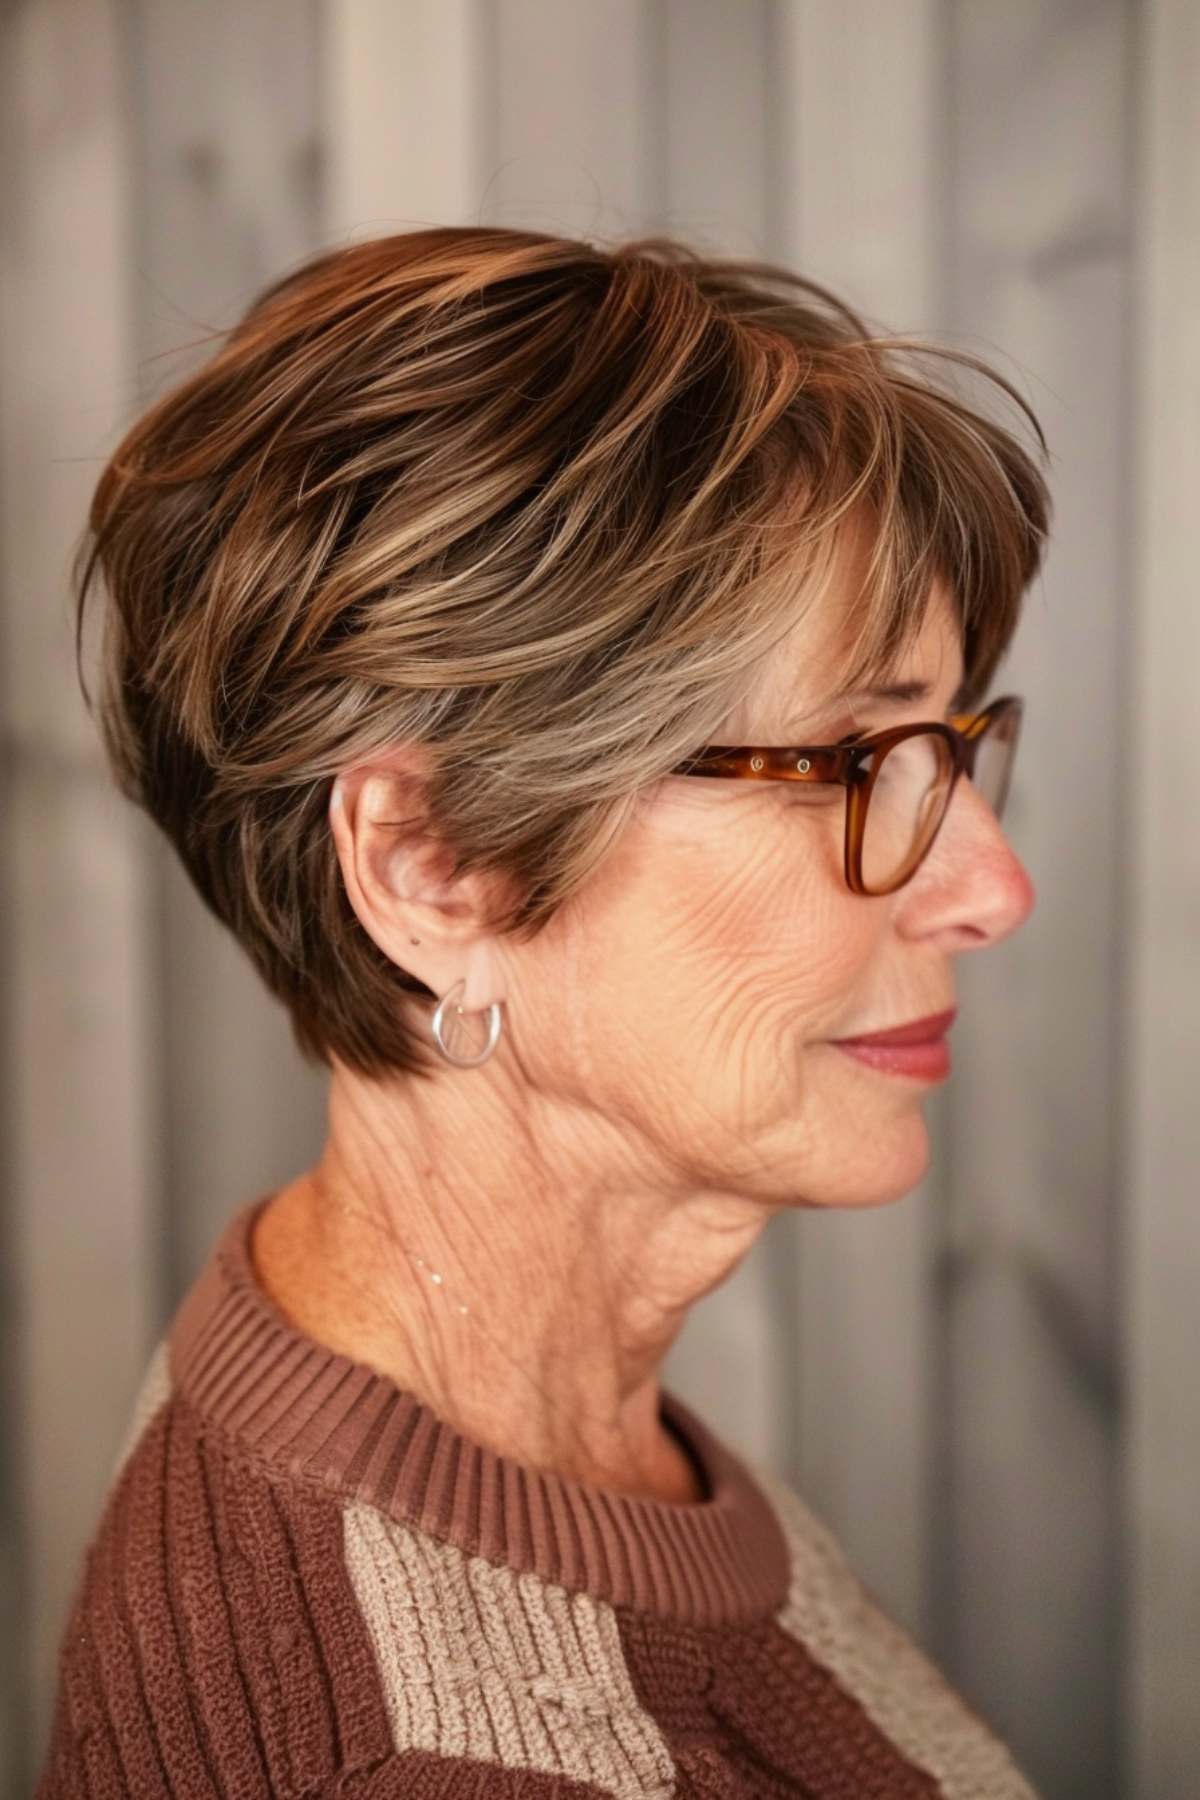 Angular pixie cut with sharp lines and glasses for a modern silhouette.